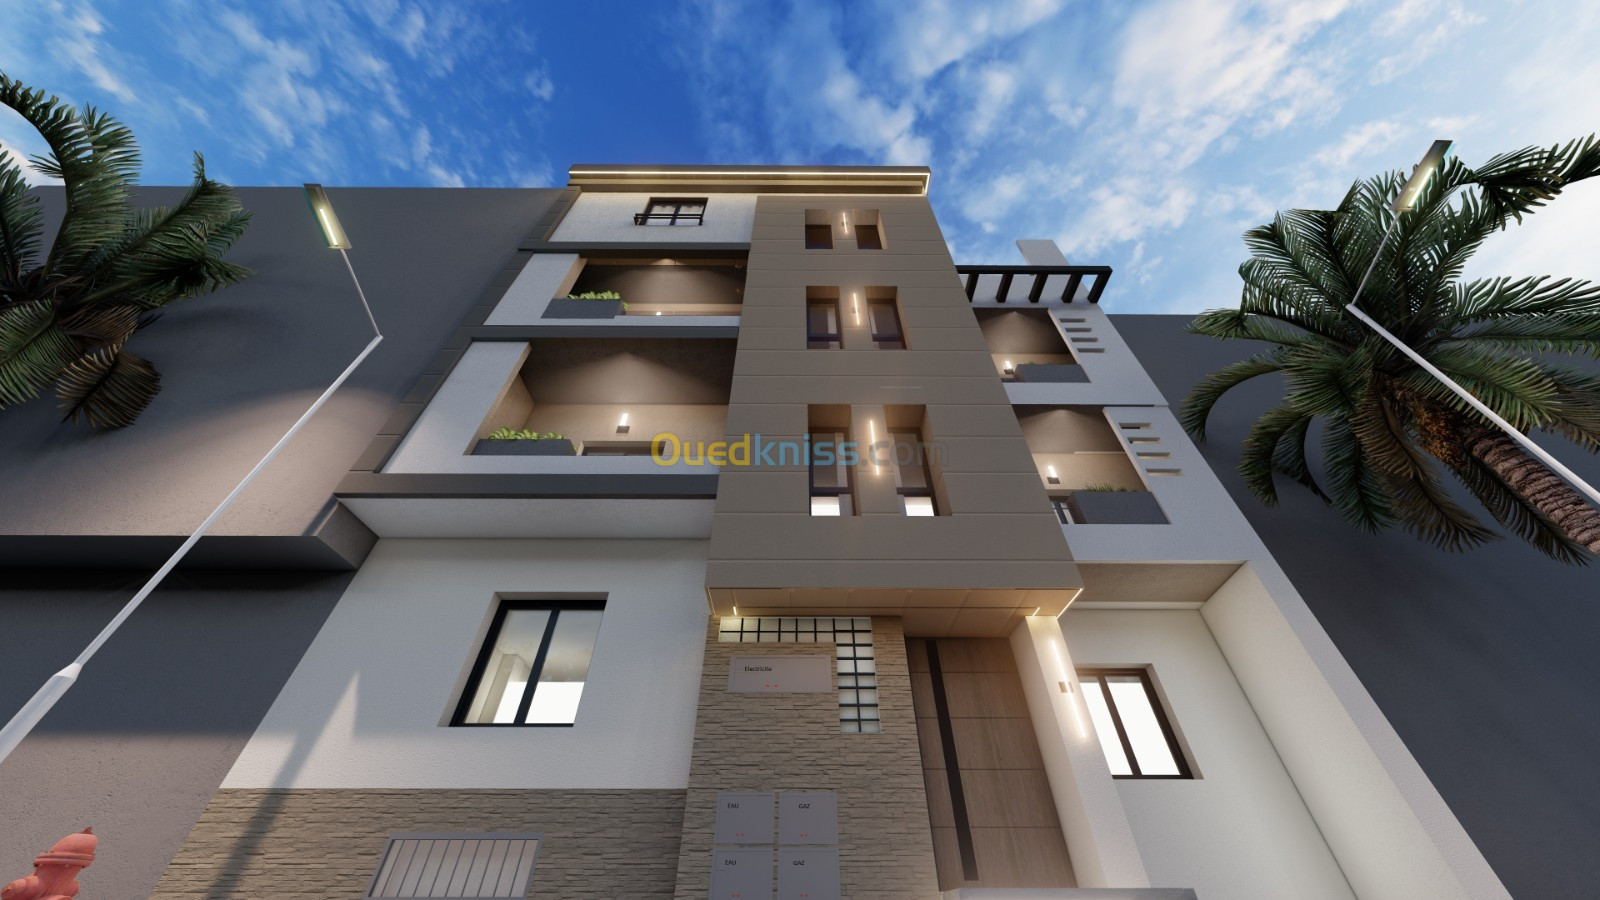 Sell Apartment F4 Alger Ouled chebel